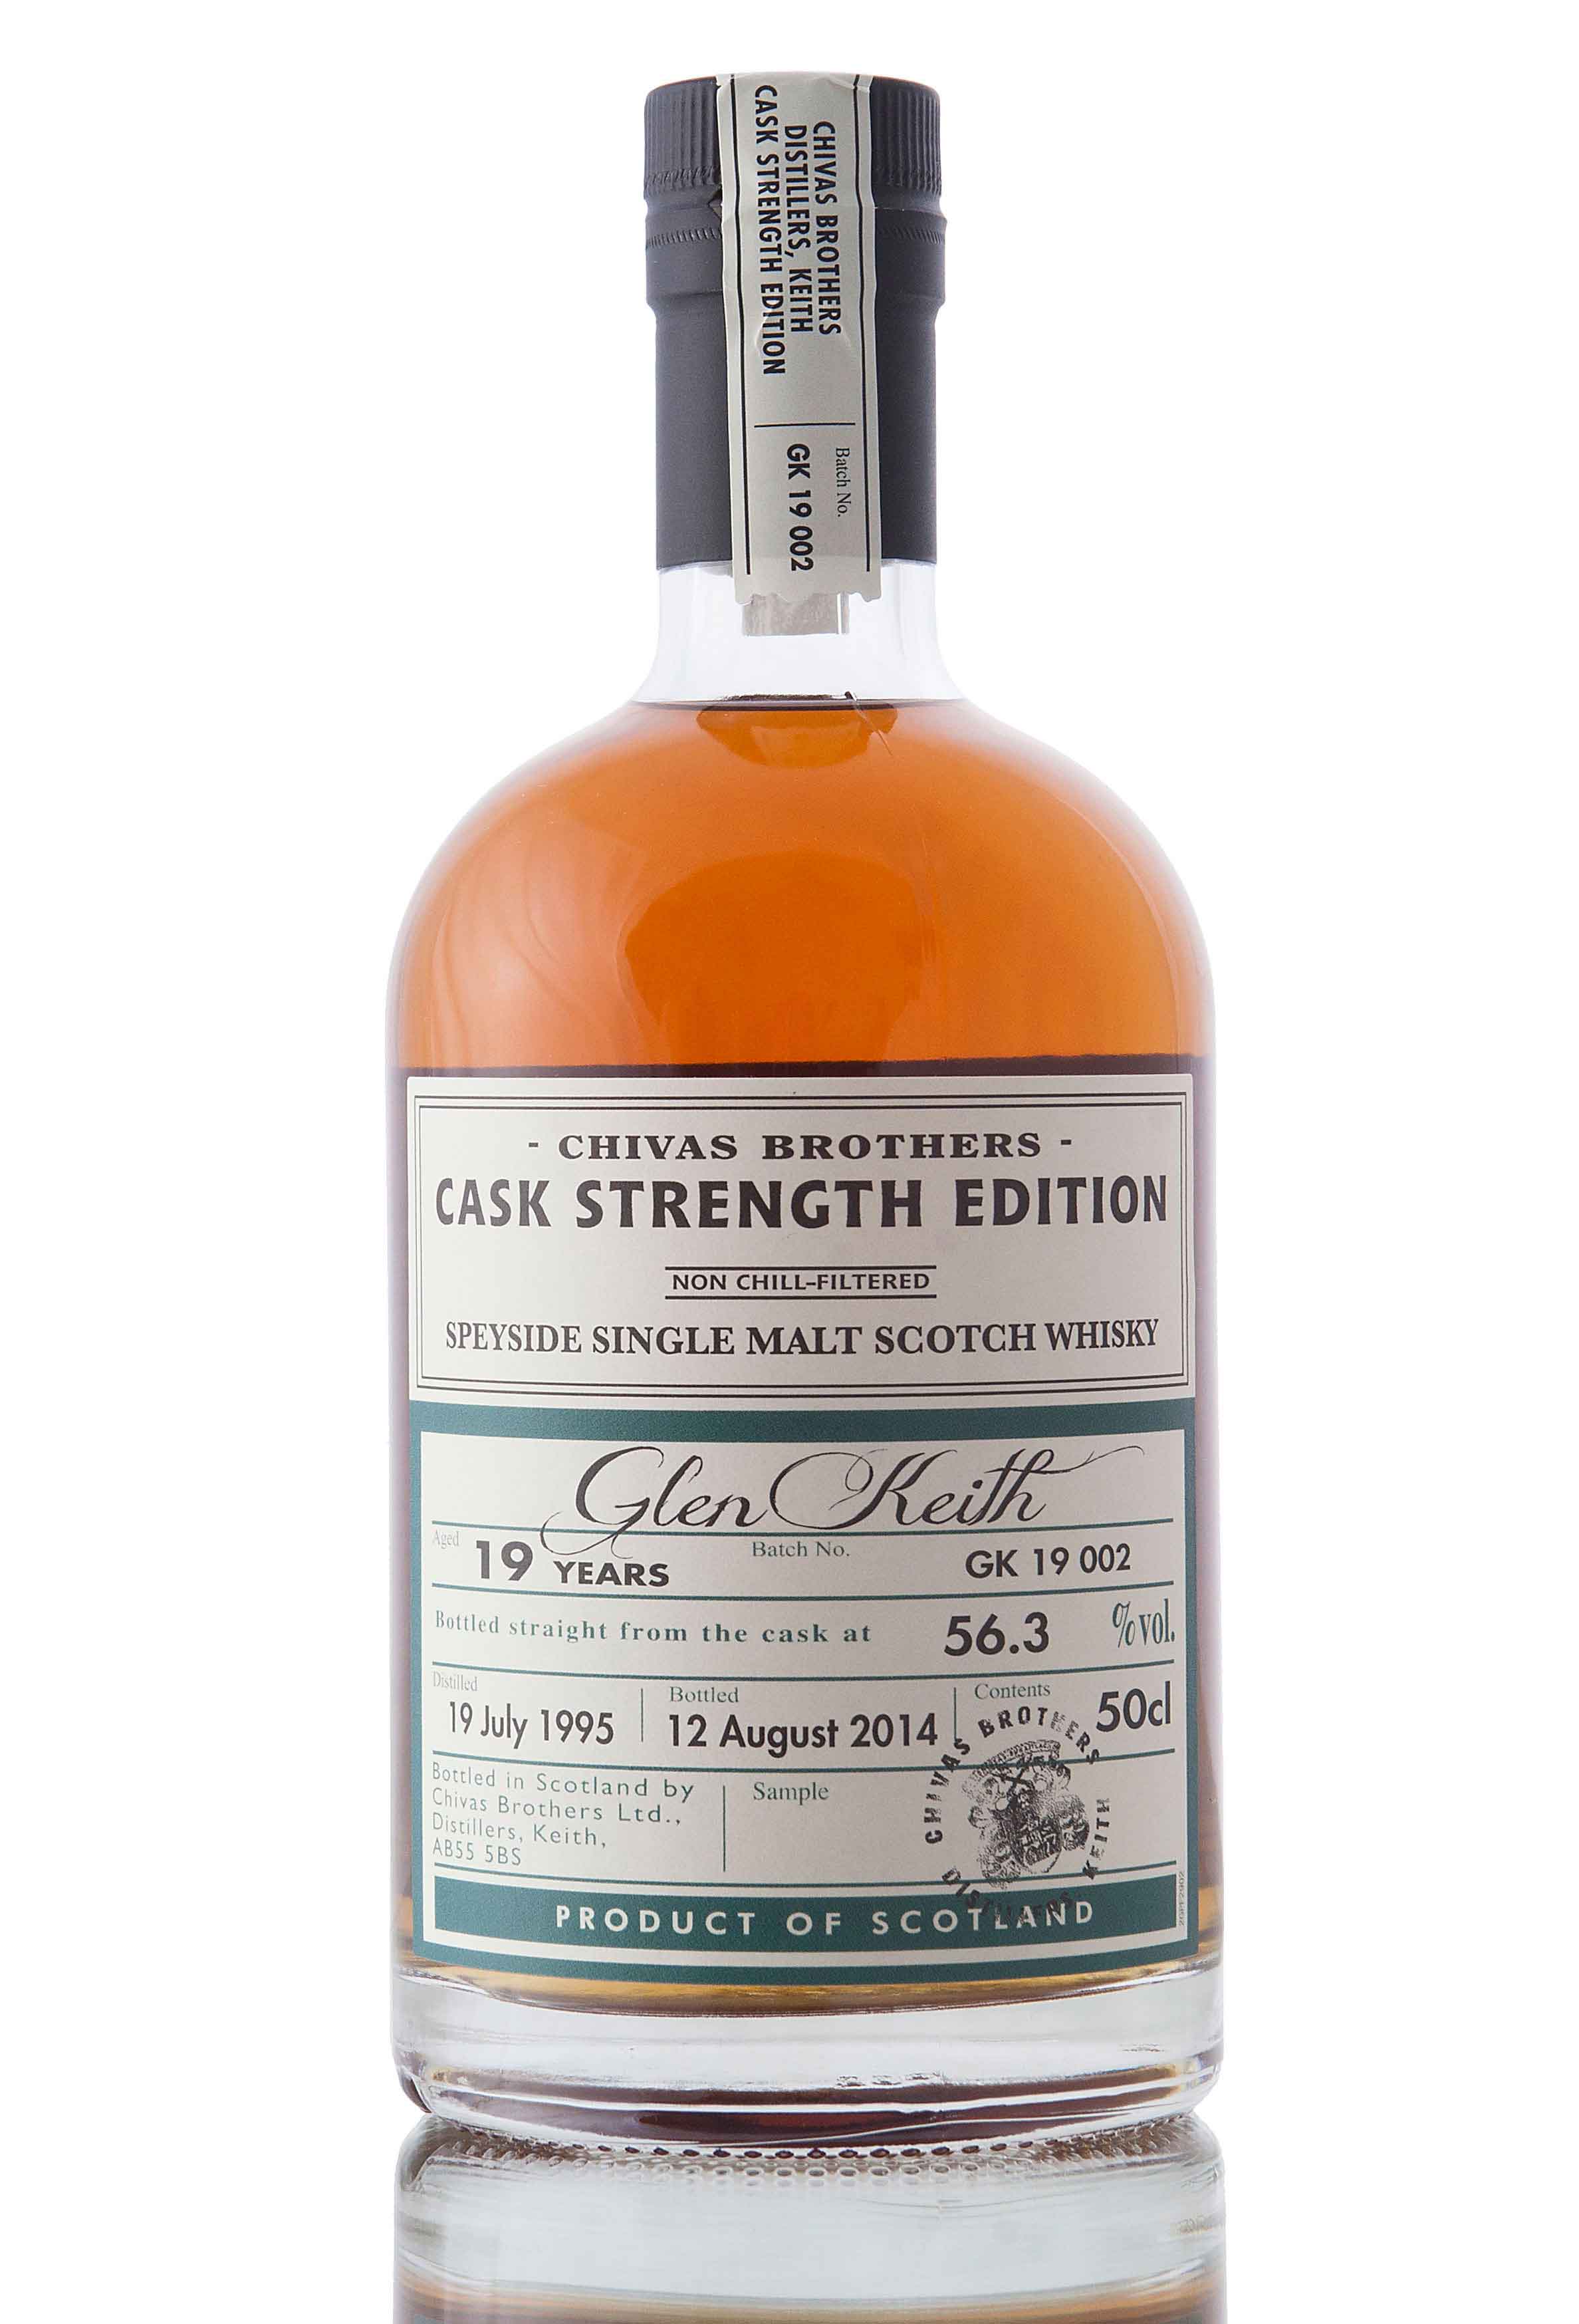 Glen Keith 19 Year Old - 1995 / Cask Strength Edition